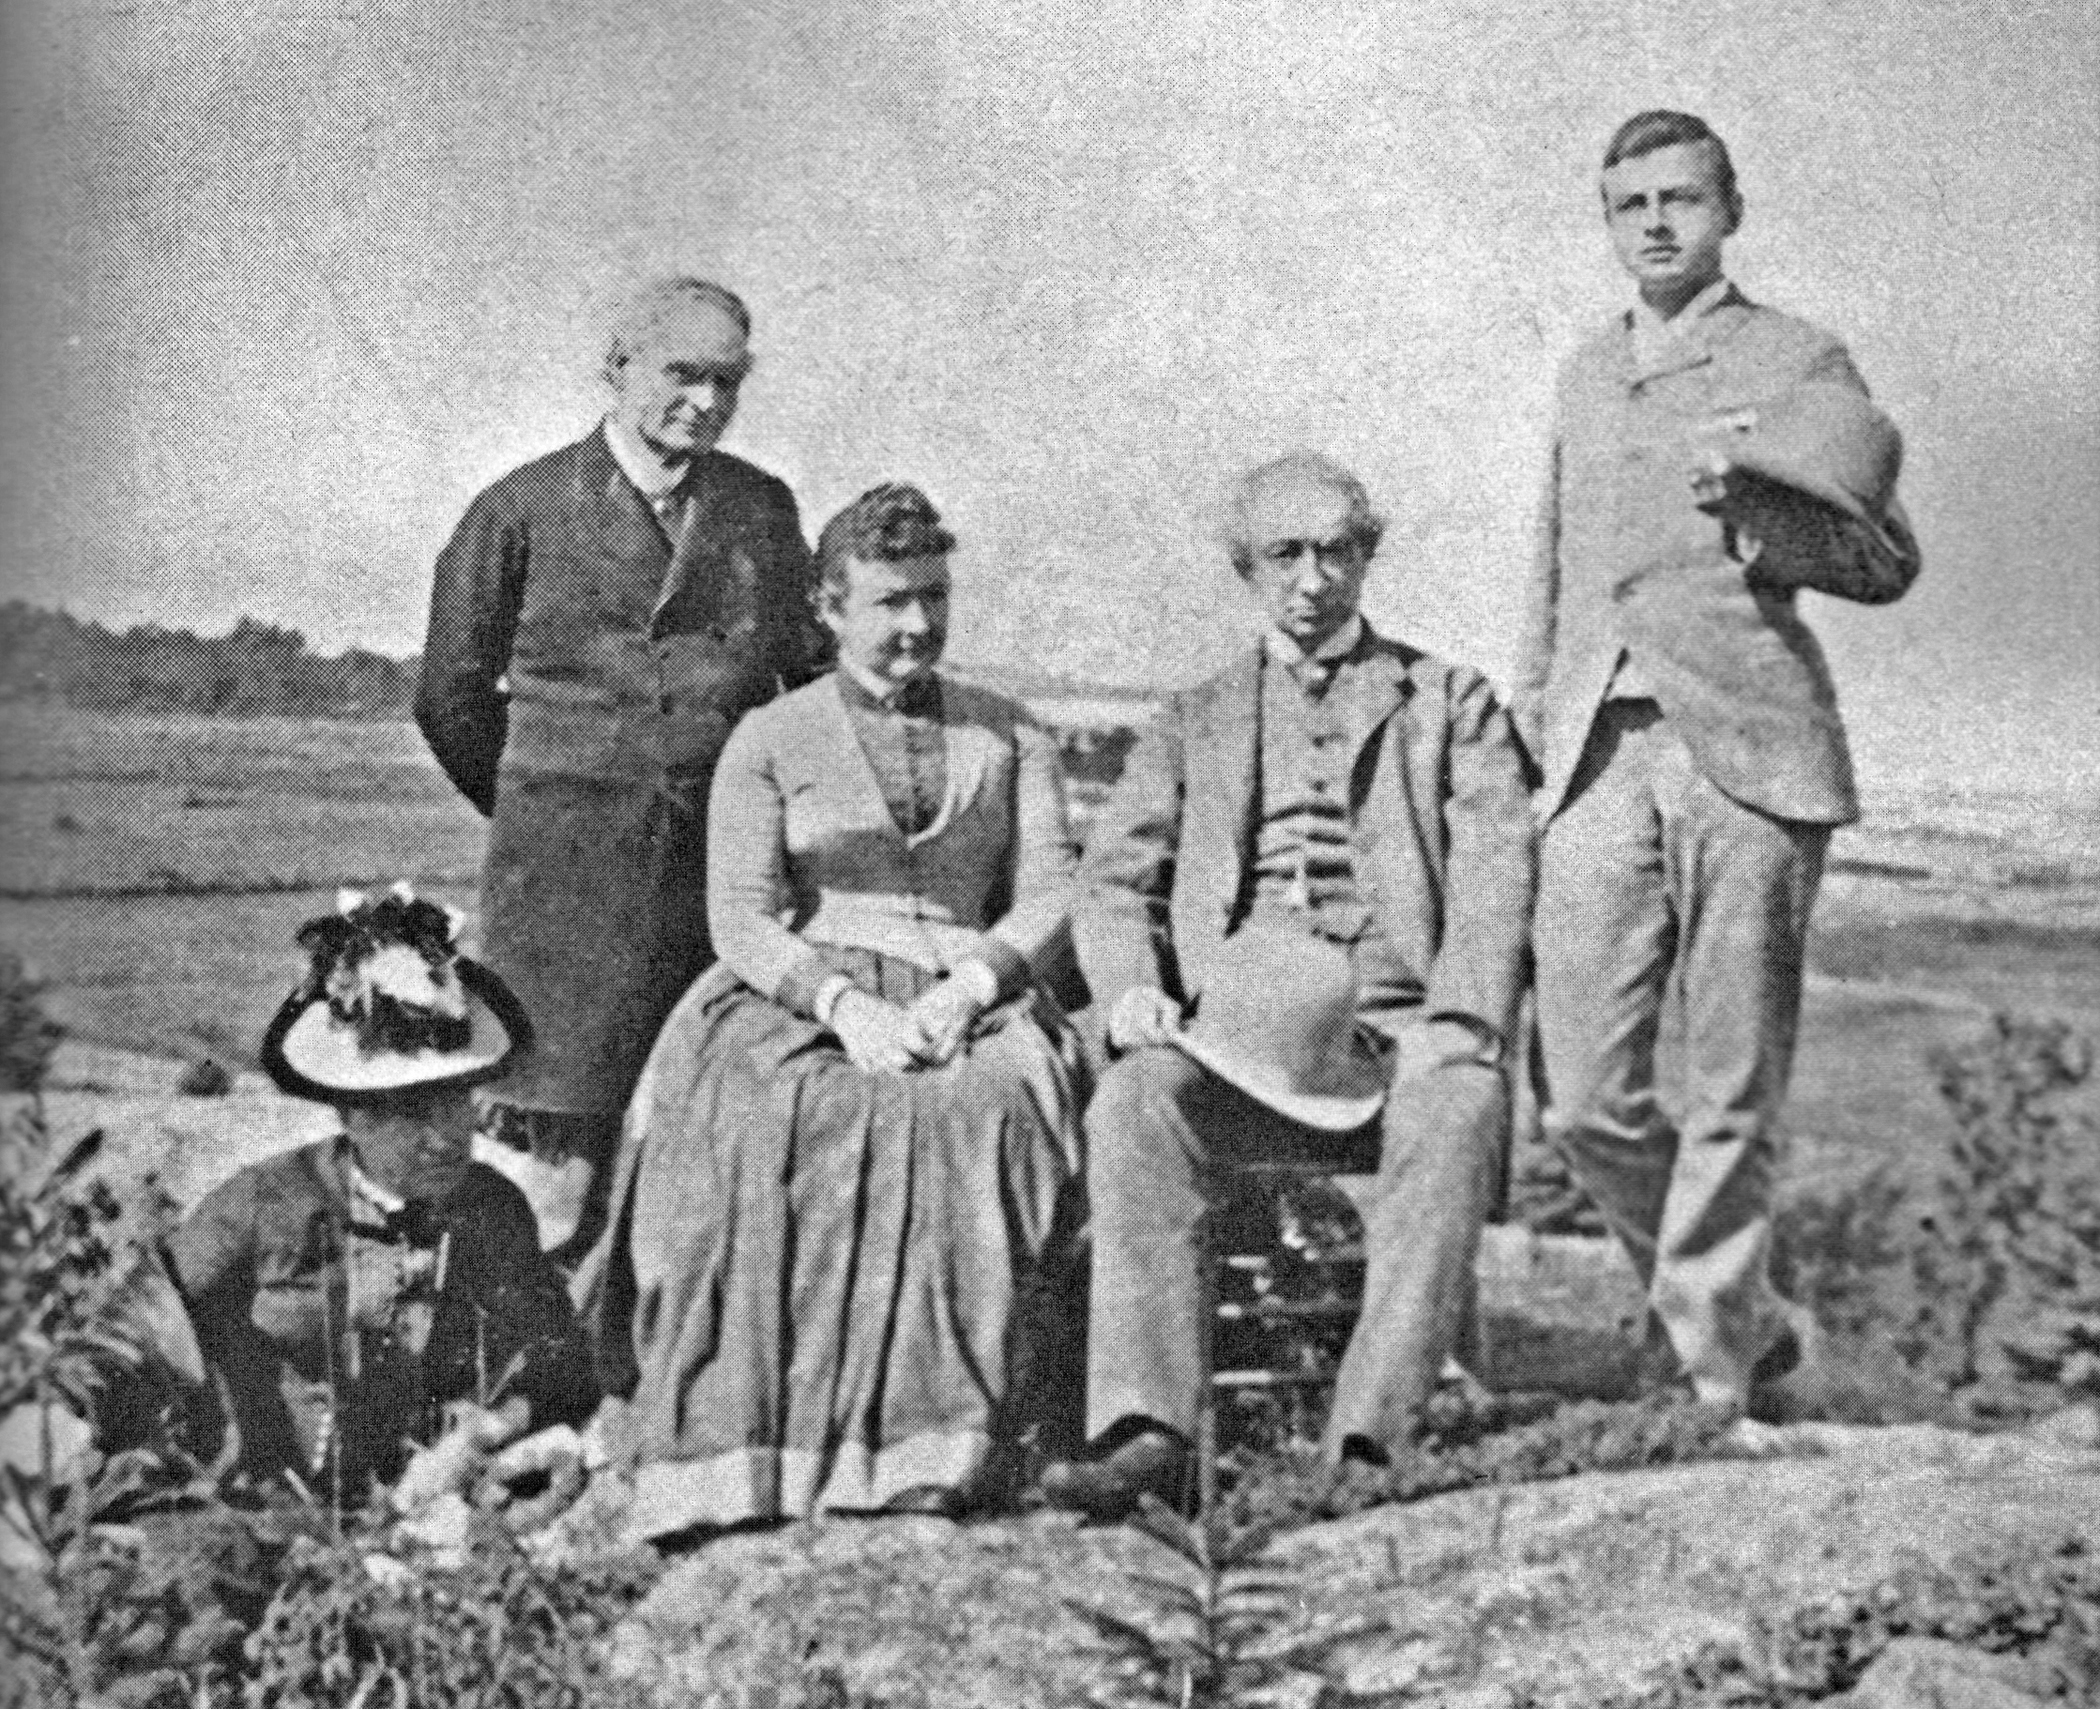 A grainy, black and white photo of five adults (Sir John A. Macdonald, Lady Agnes Macdonald and members of the Tilley family) standing and seated on some rocky ground, with the Saint Lawrence River behind them.